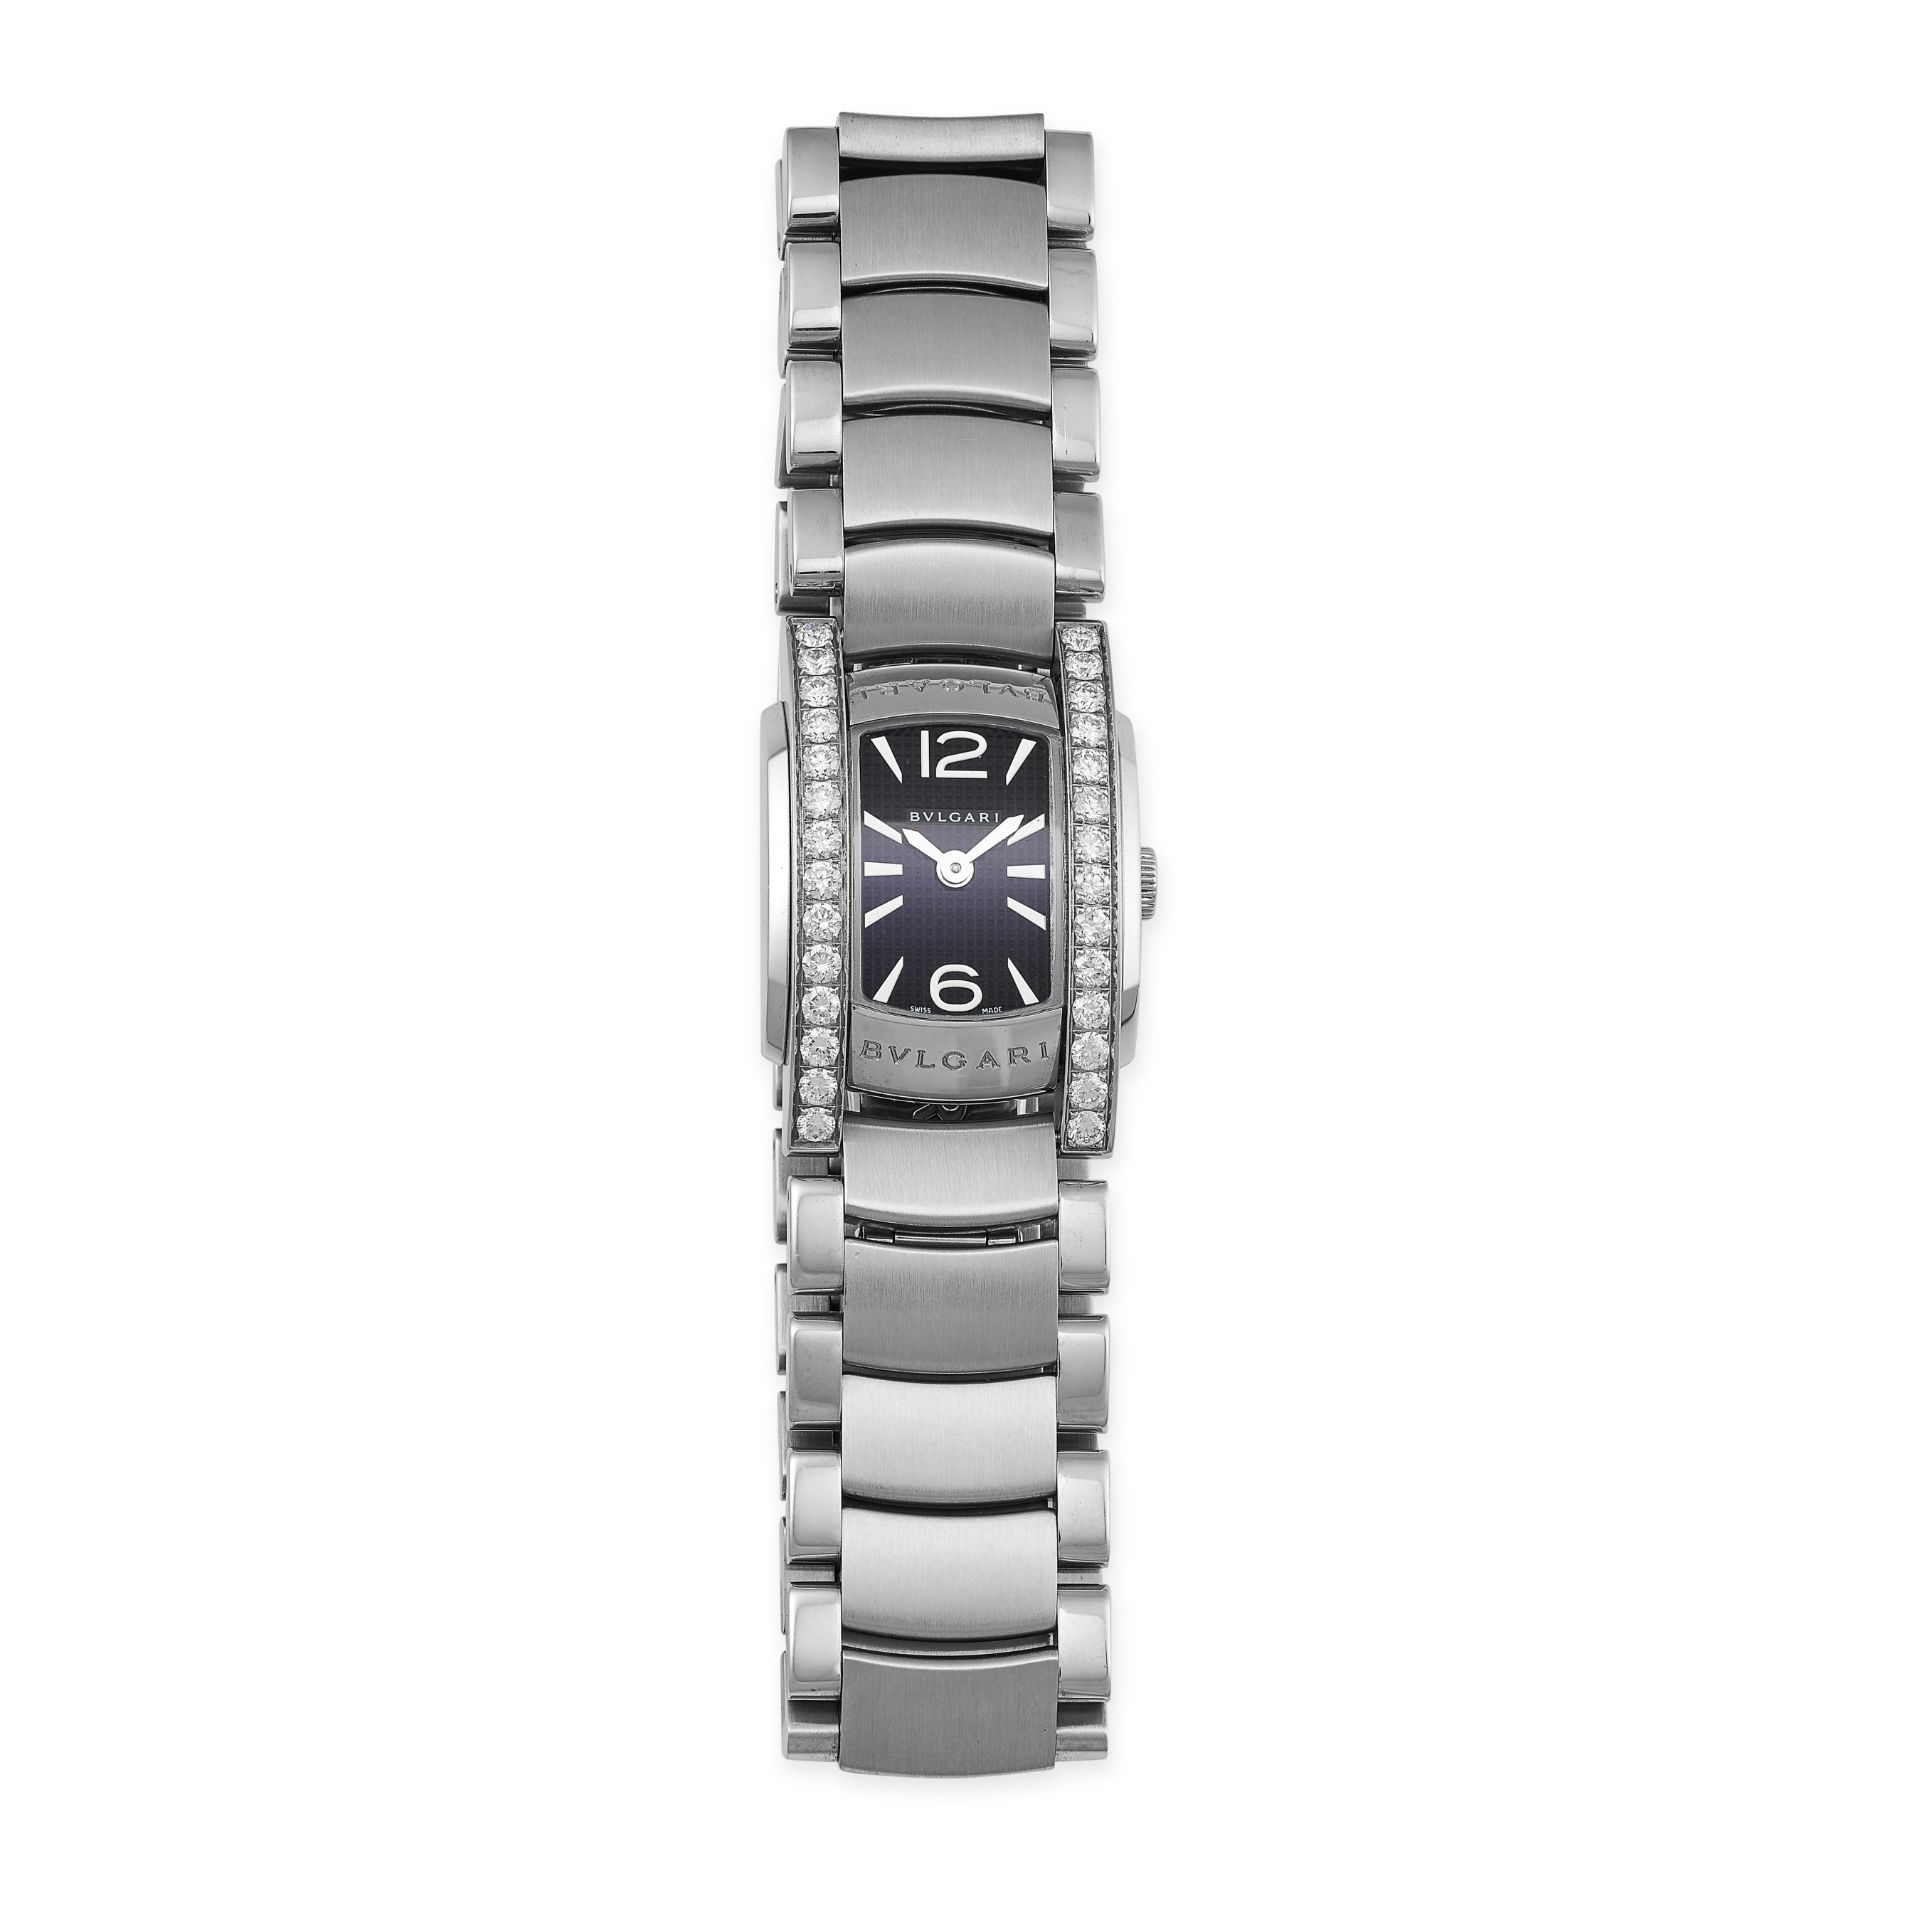 BULGARI, A LADIES ASSIOMA D DIAMOND WRISTWATCH, in stainless steel, black pyramid dial with appli...